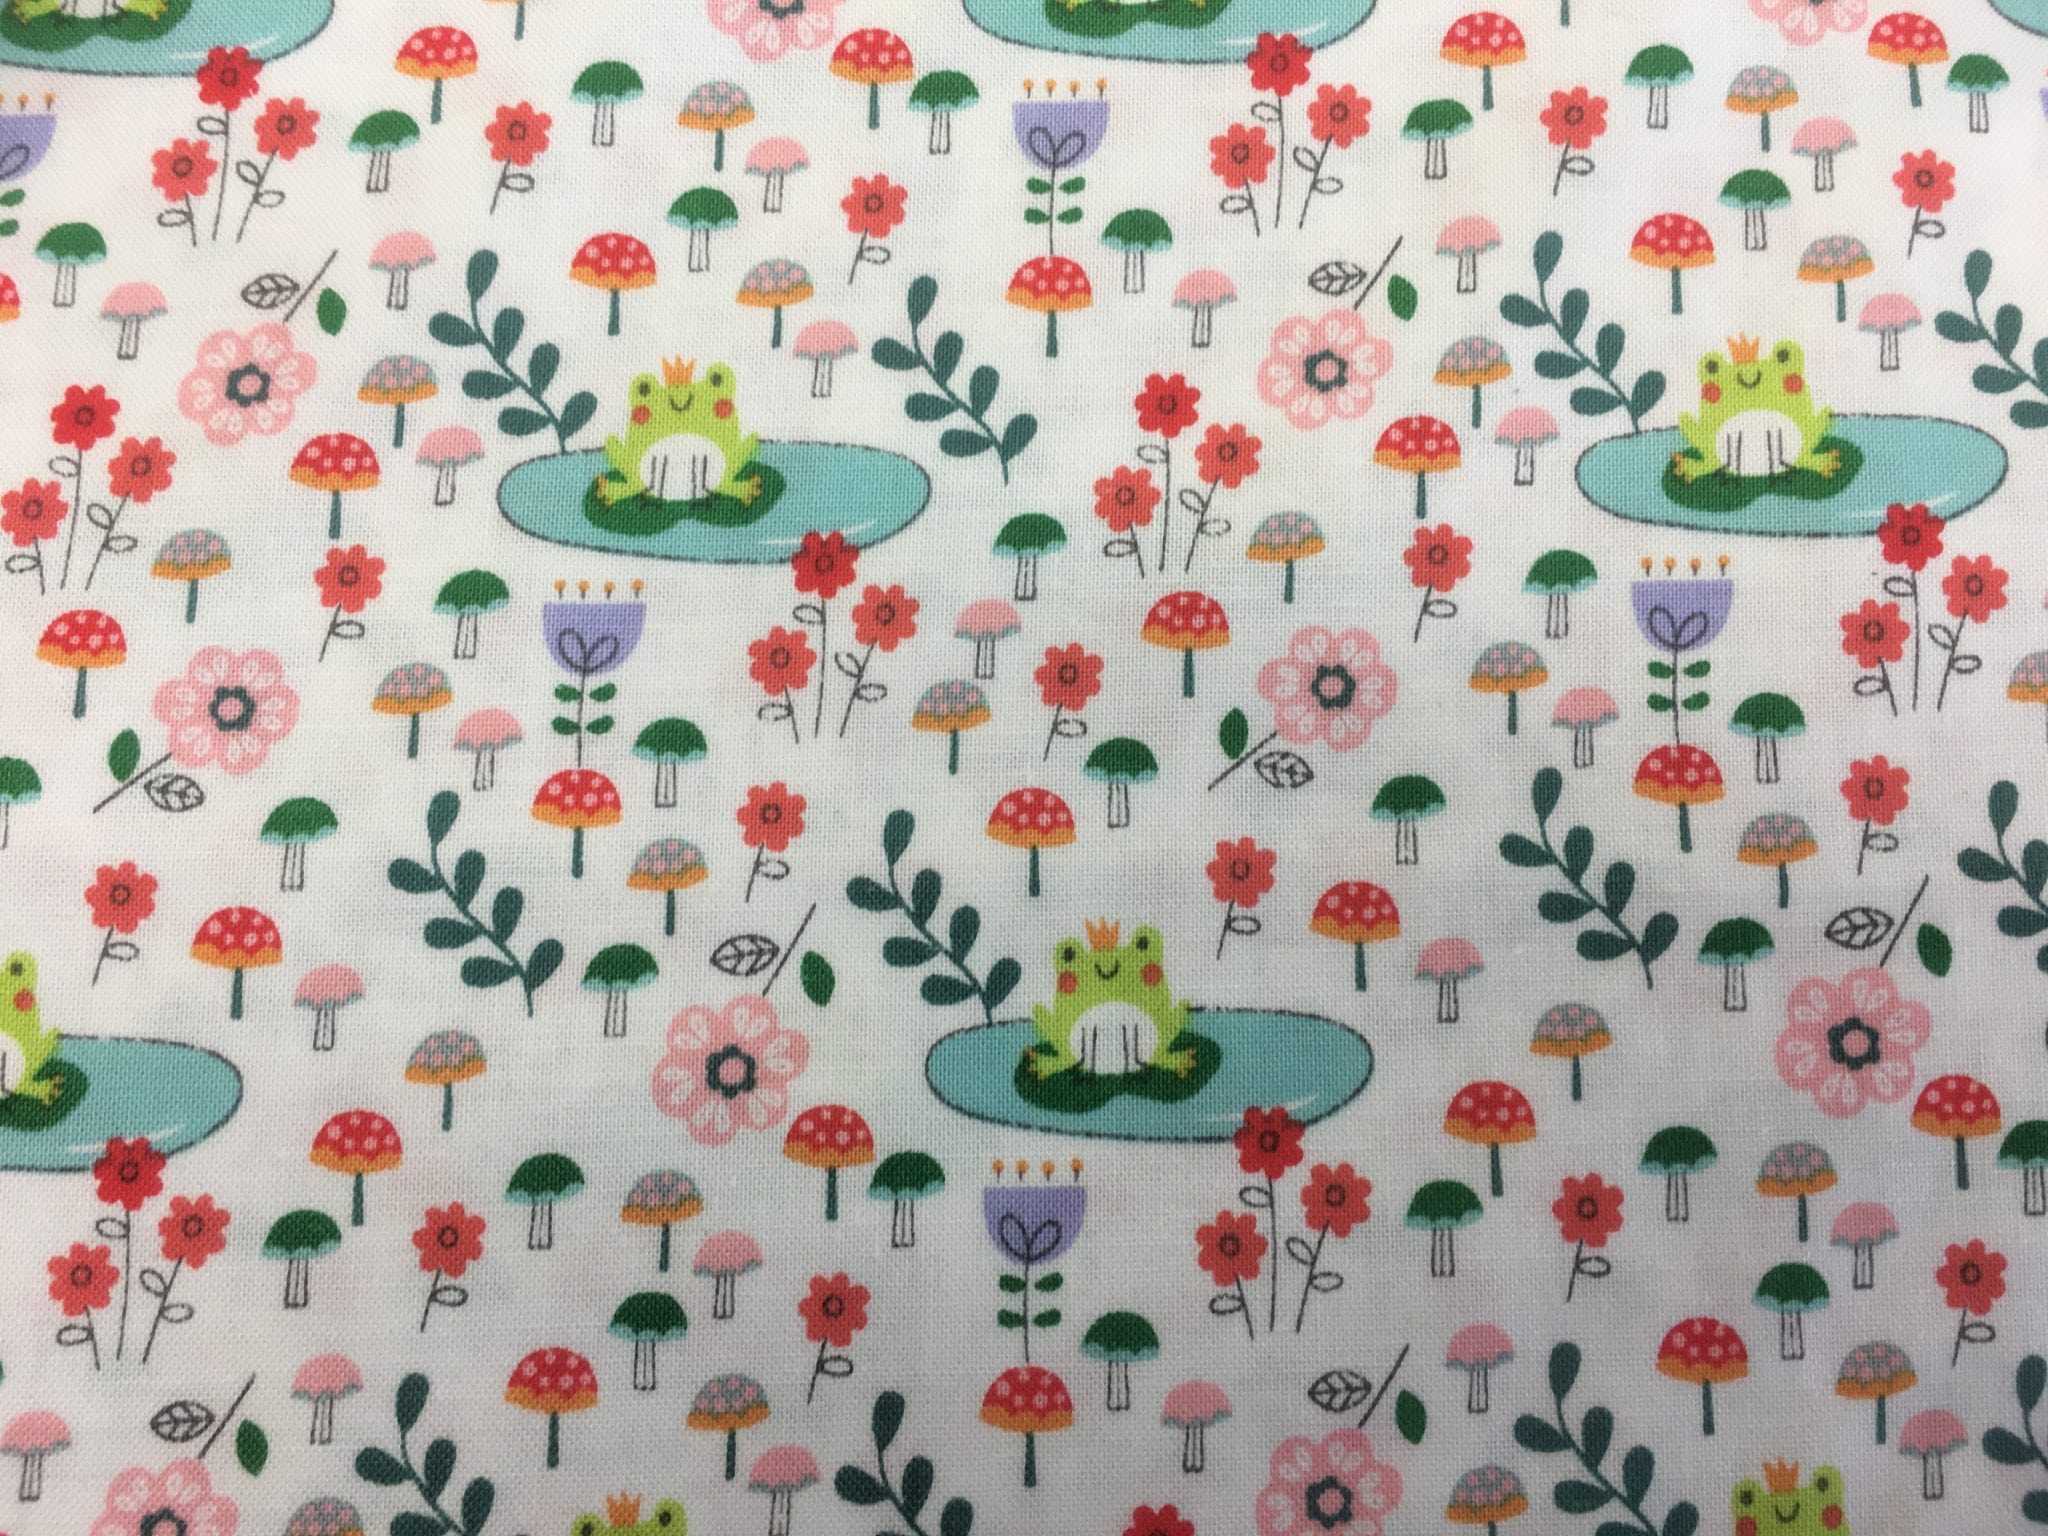 Children's Fabric Swatch Frog Prince